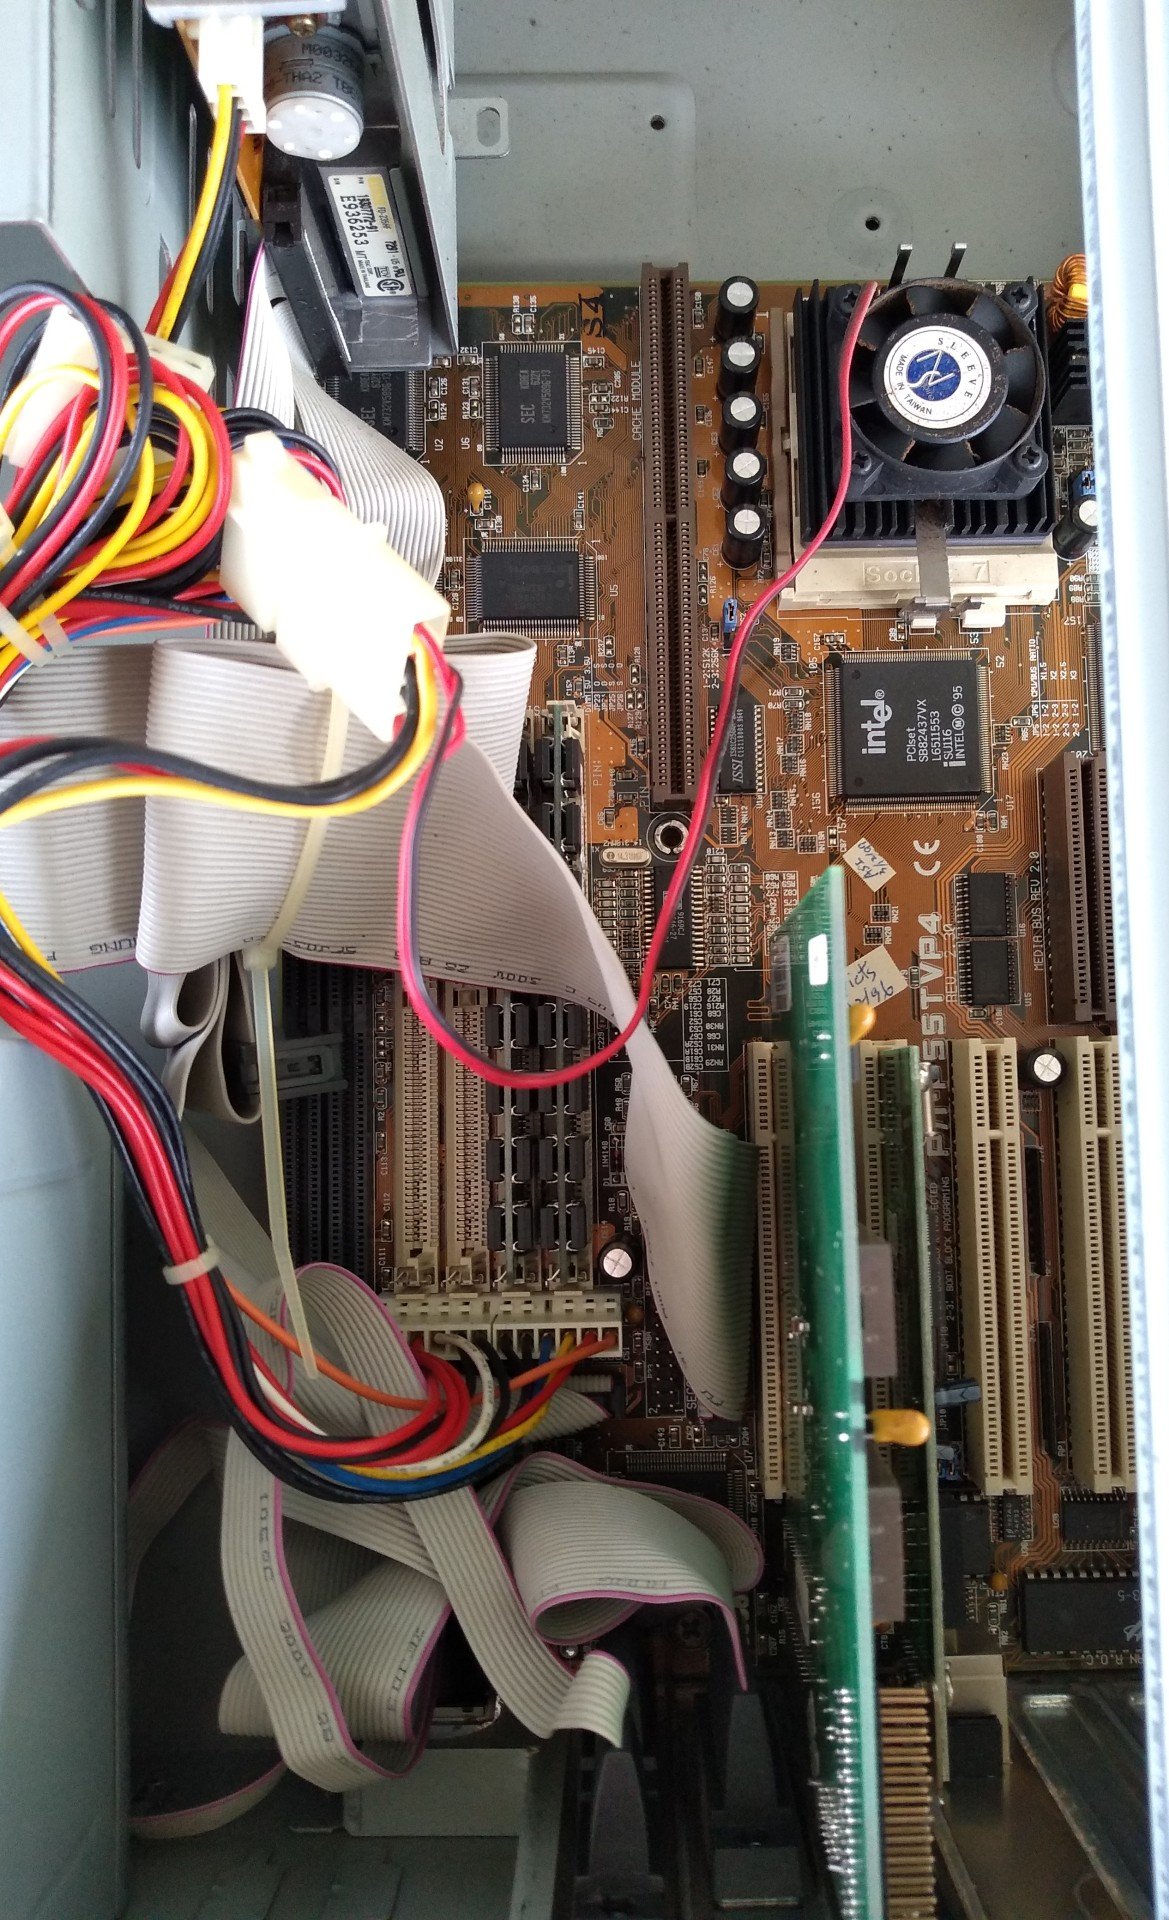 My first peek inside the Victs PC